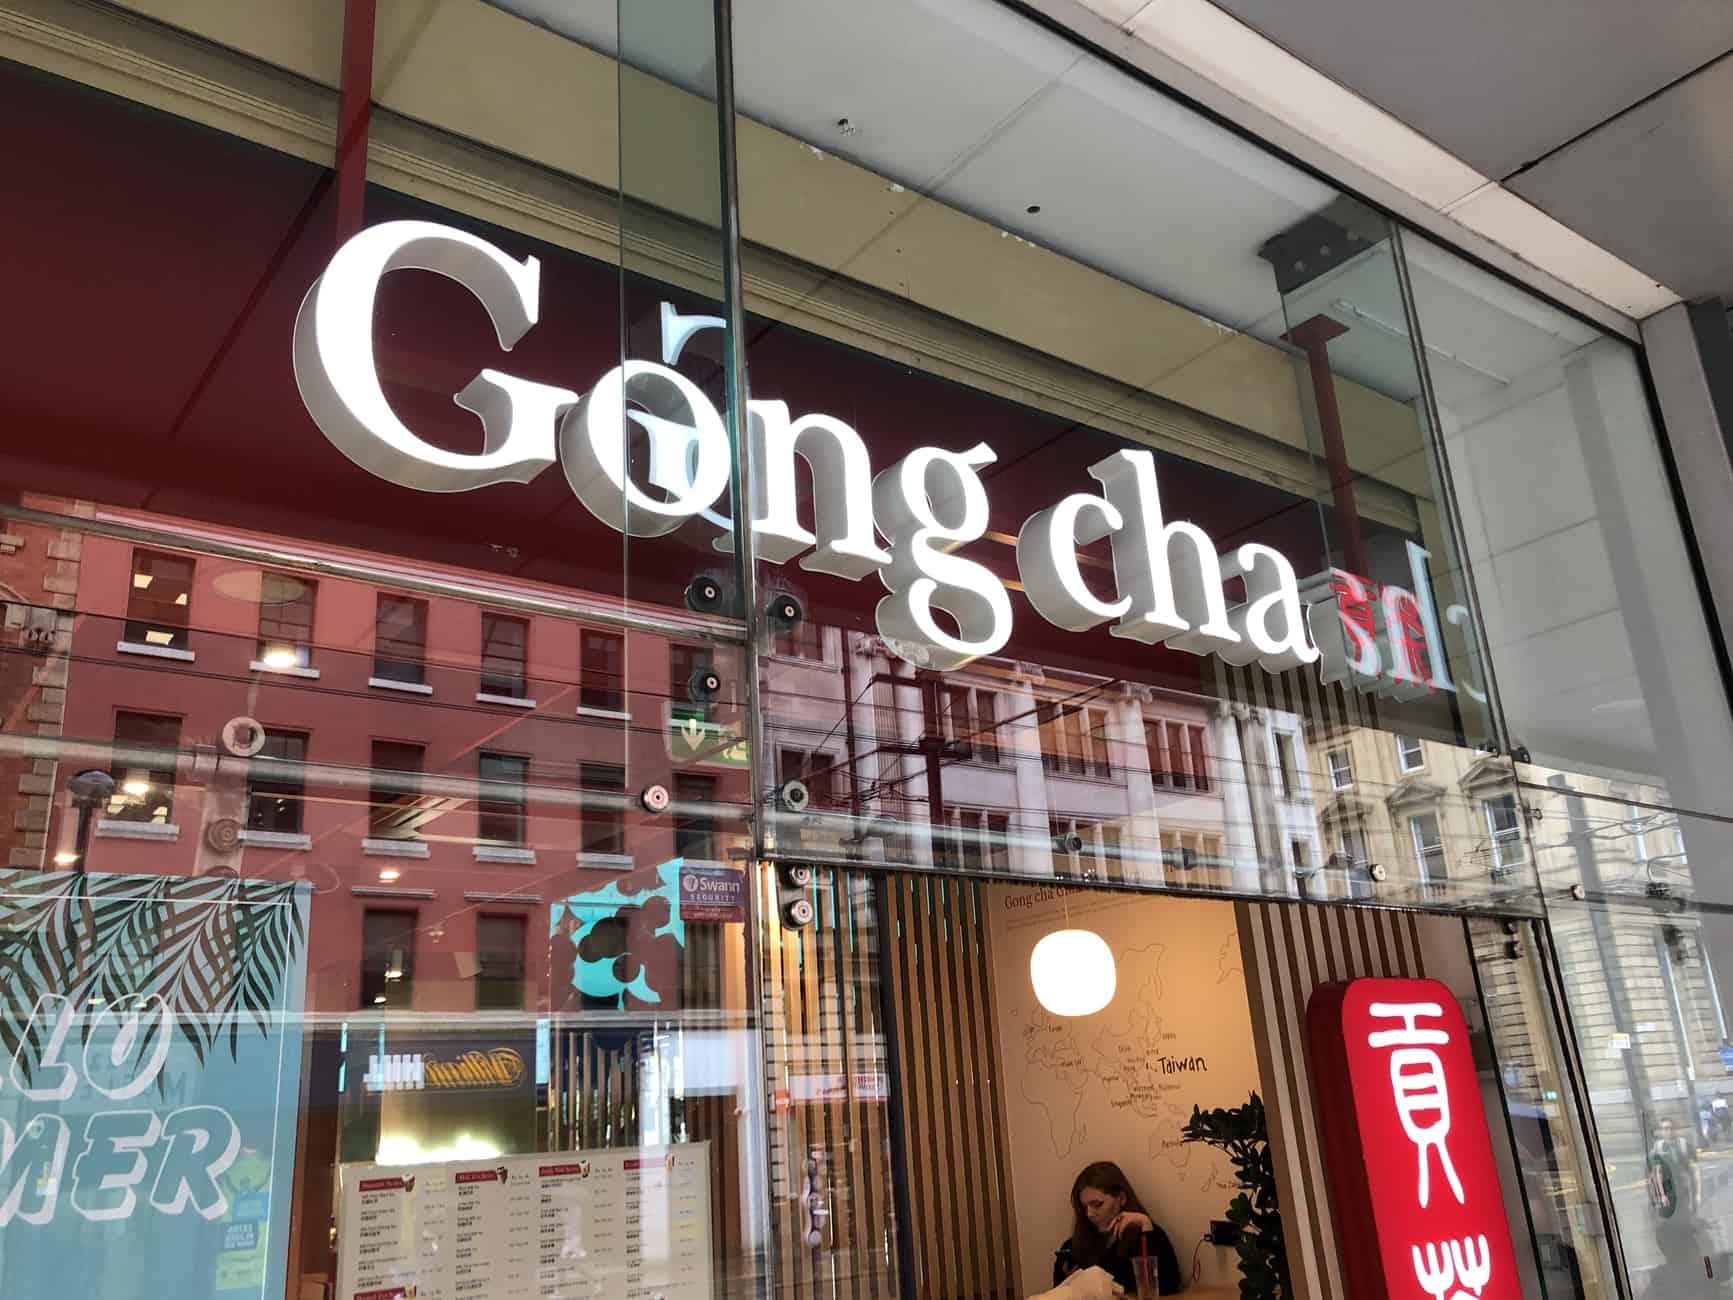 Is Gong Cha The Best Bubble Tea in Manchester? Let's Find Out